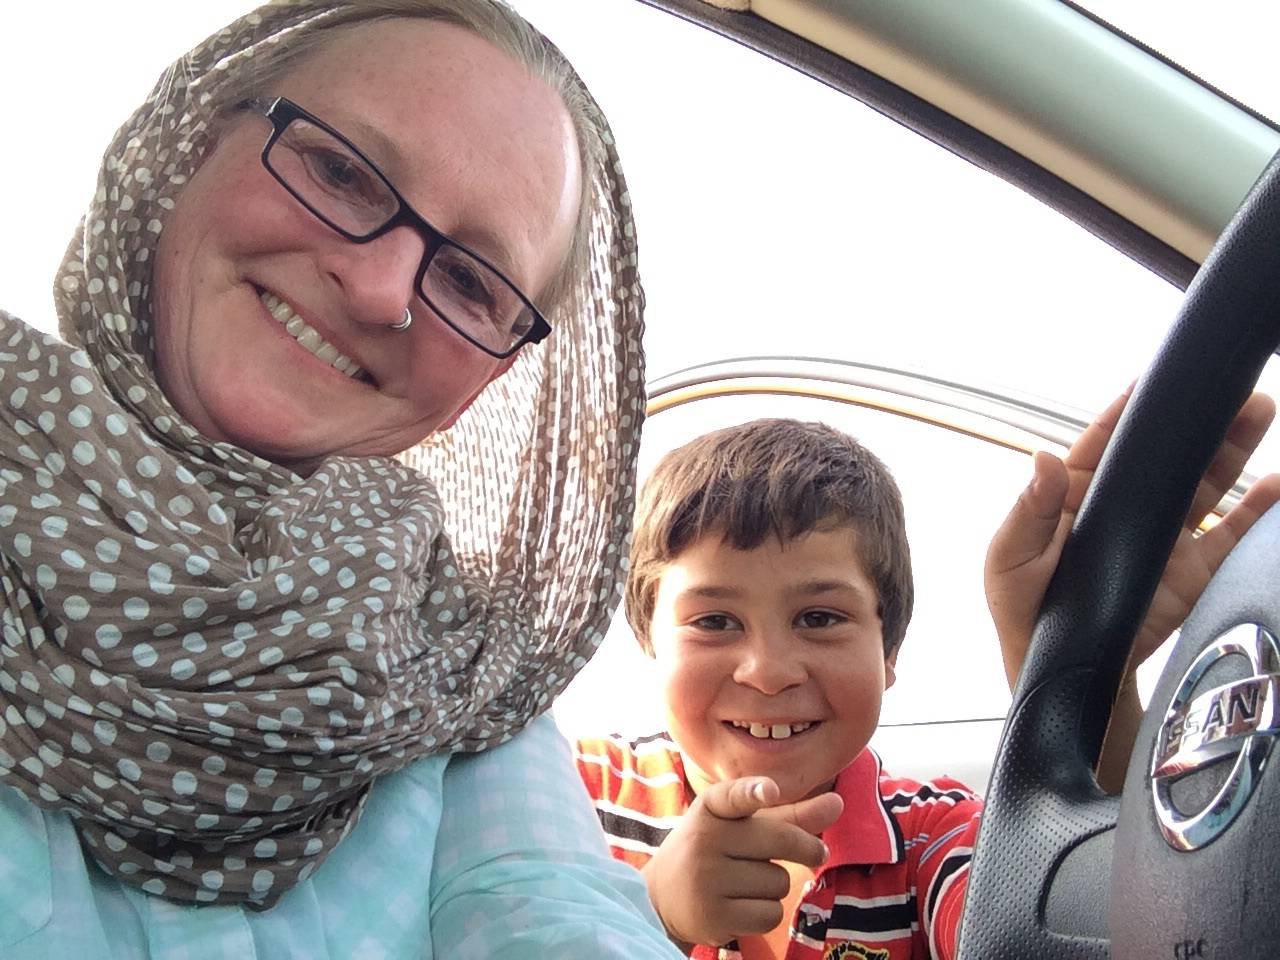 Christina Whiting and a 6-year-old boy named Amad she met during her travels pose for a picture in 2015 in Jordan. (Photo courtesy Christina Whiting)